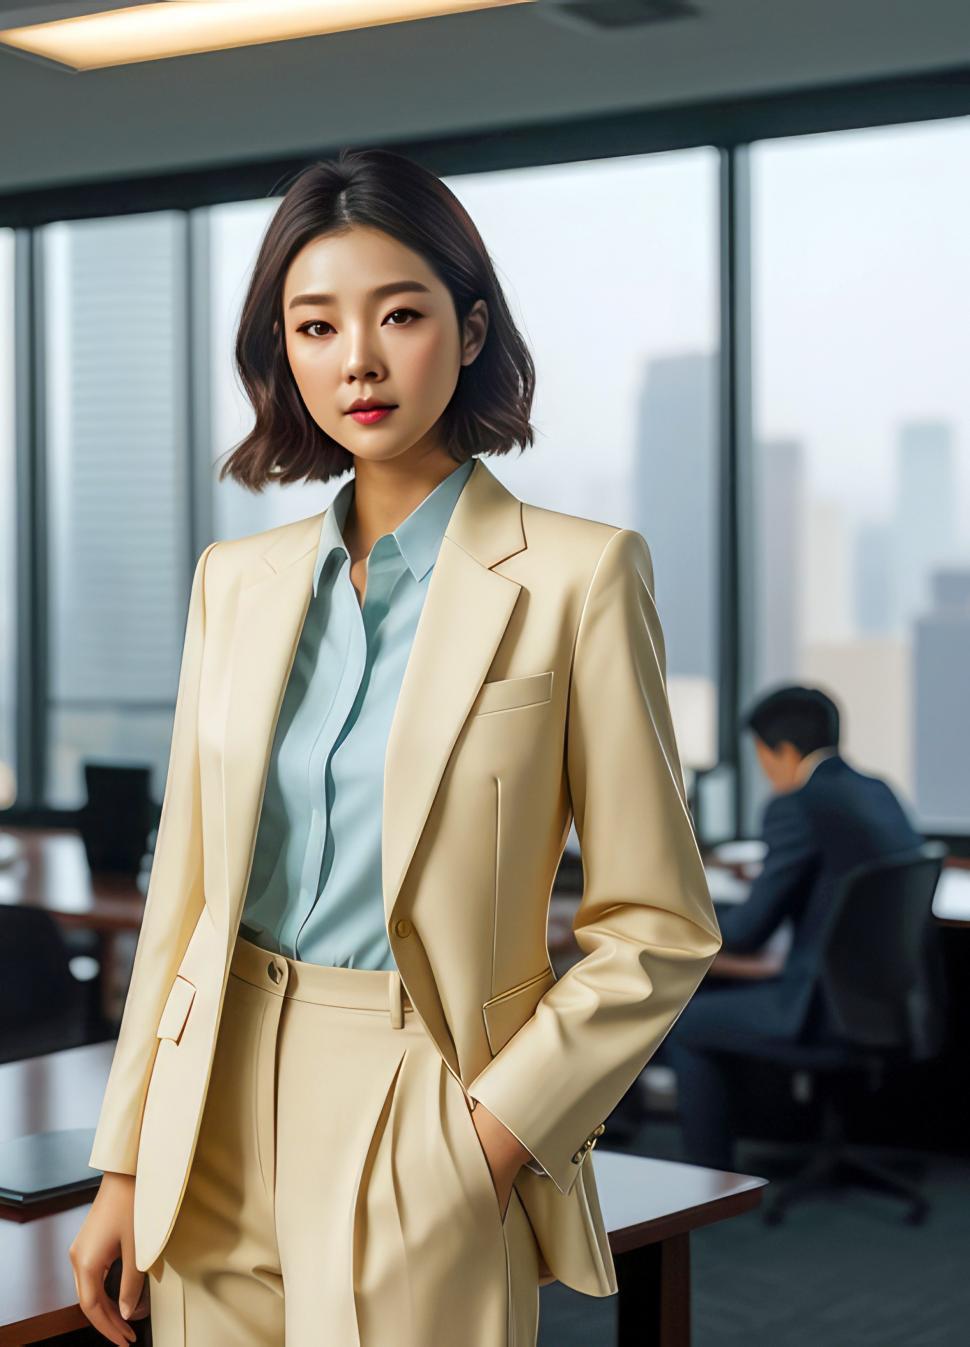 Free Image of Businesswoman in an office  